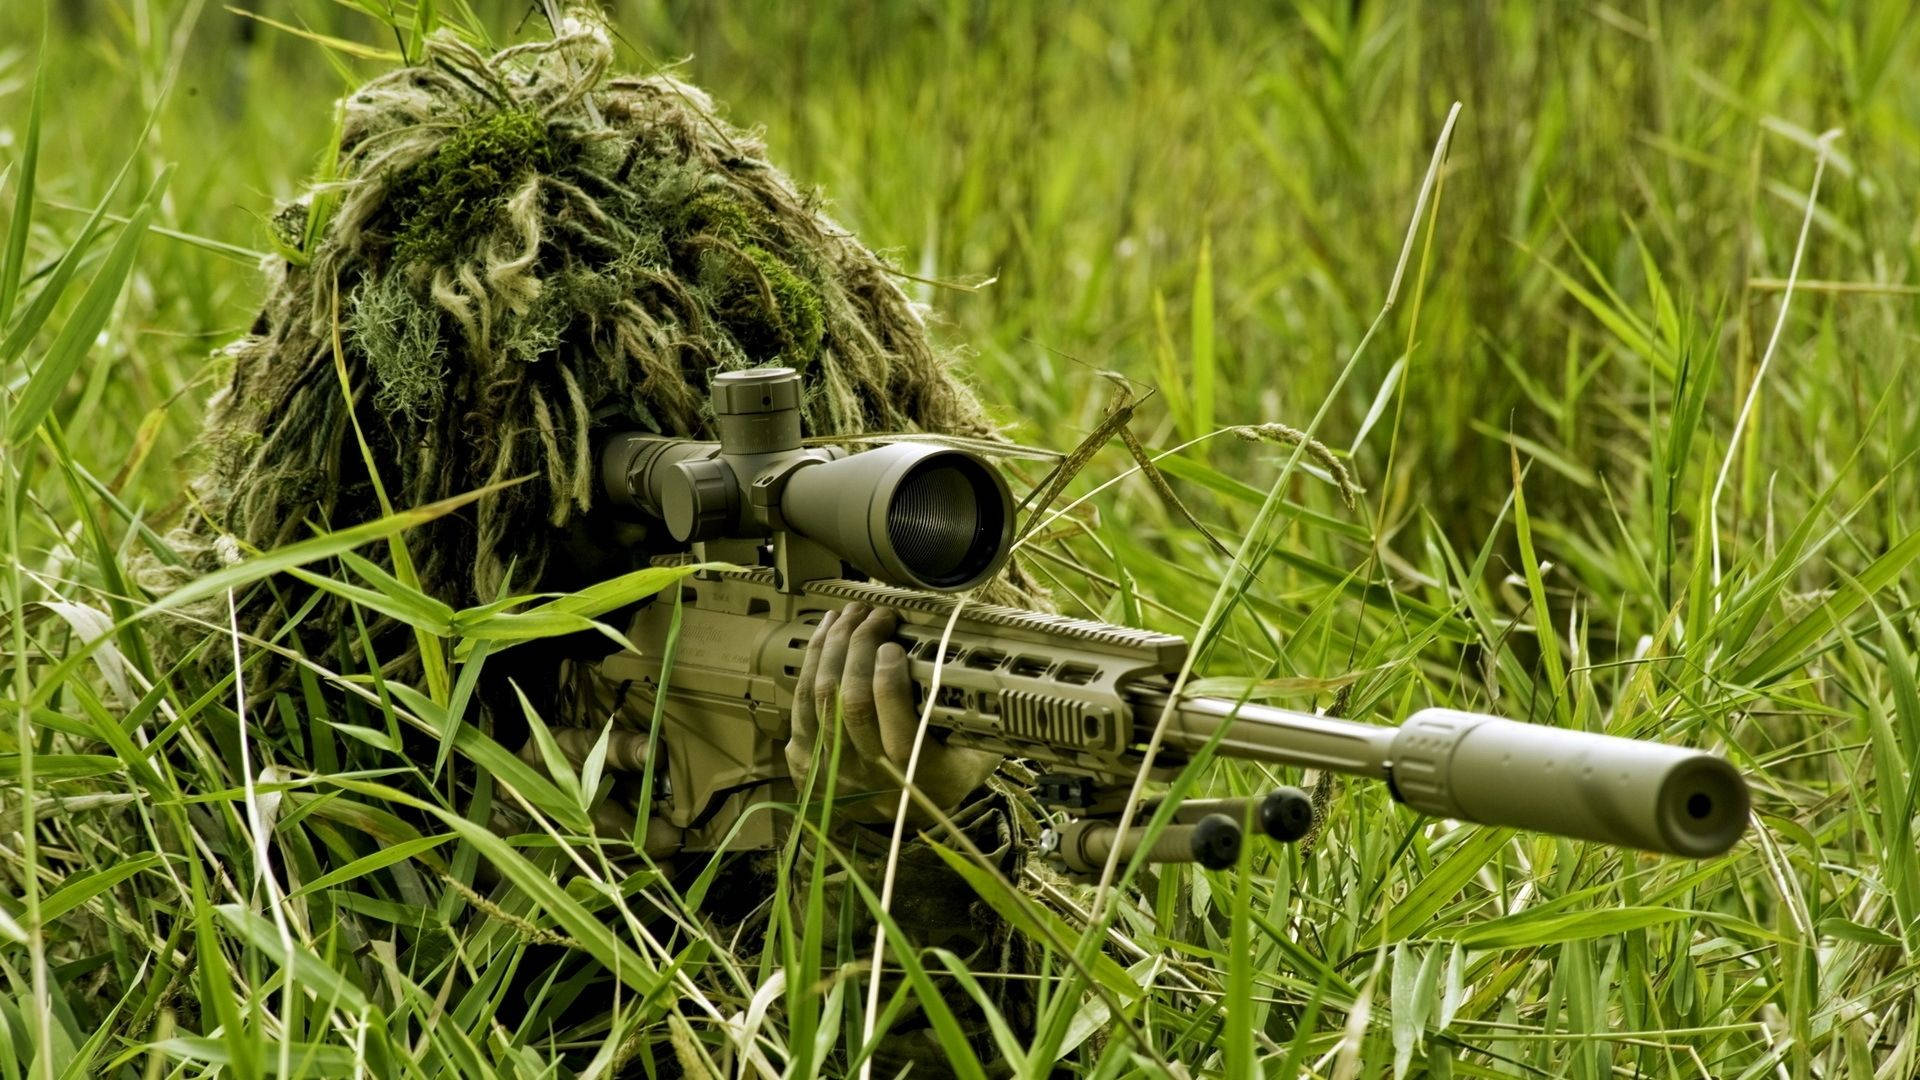 Sniper In Grass Camouflage Background